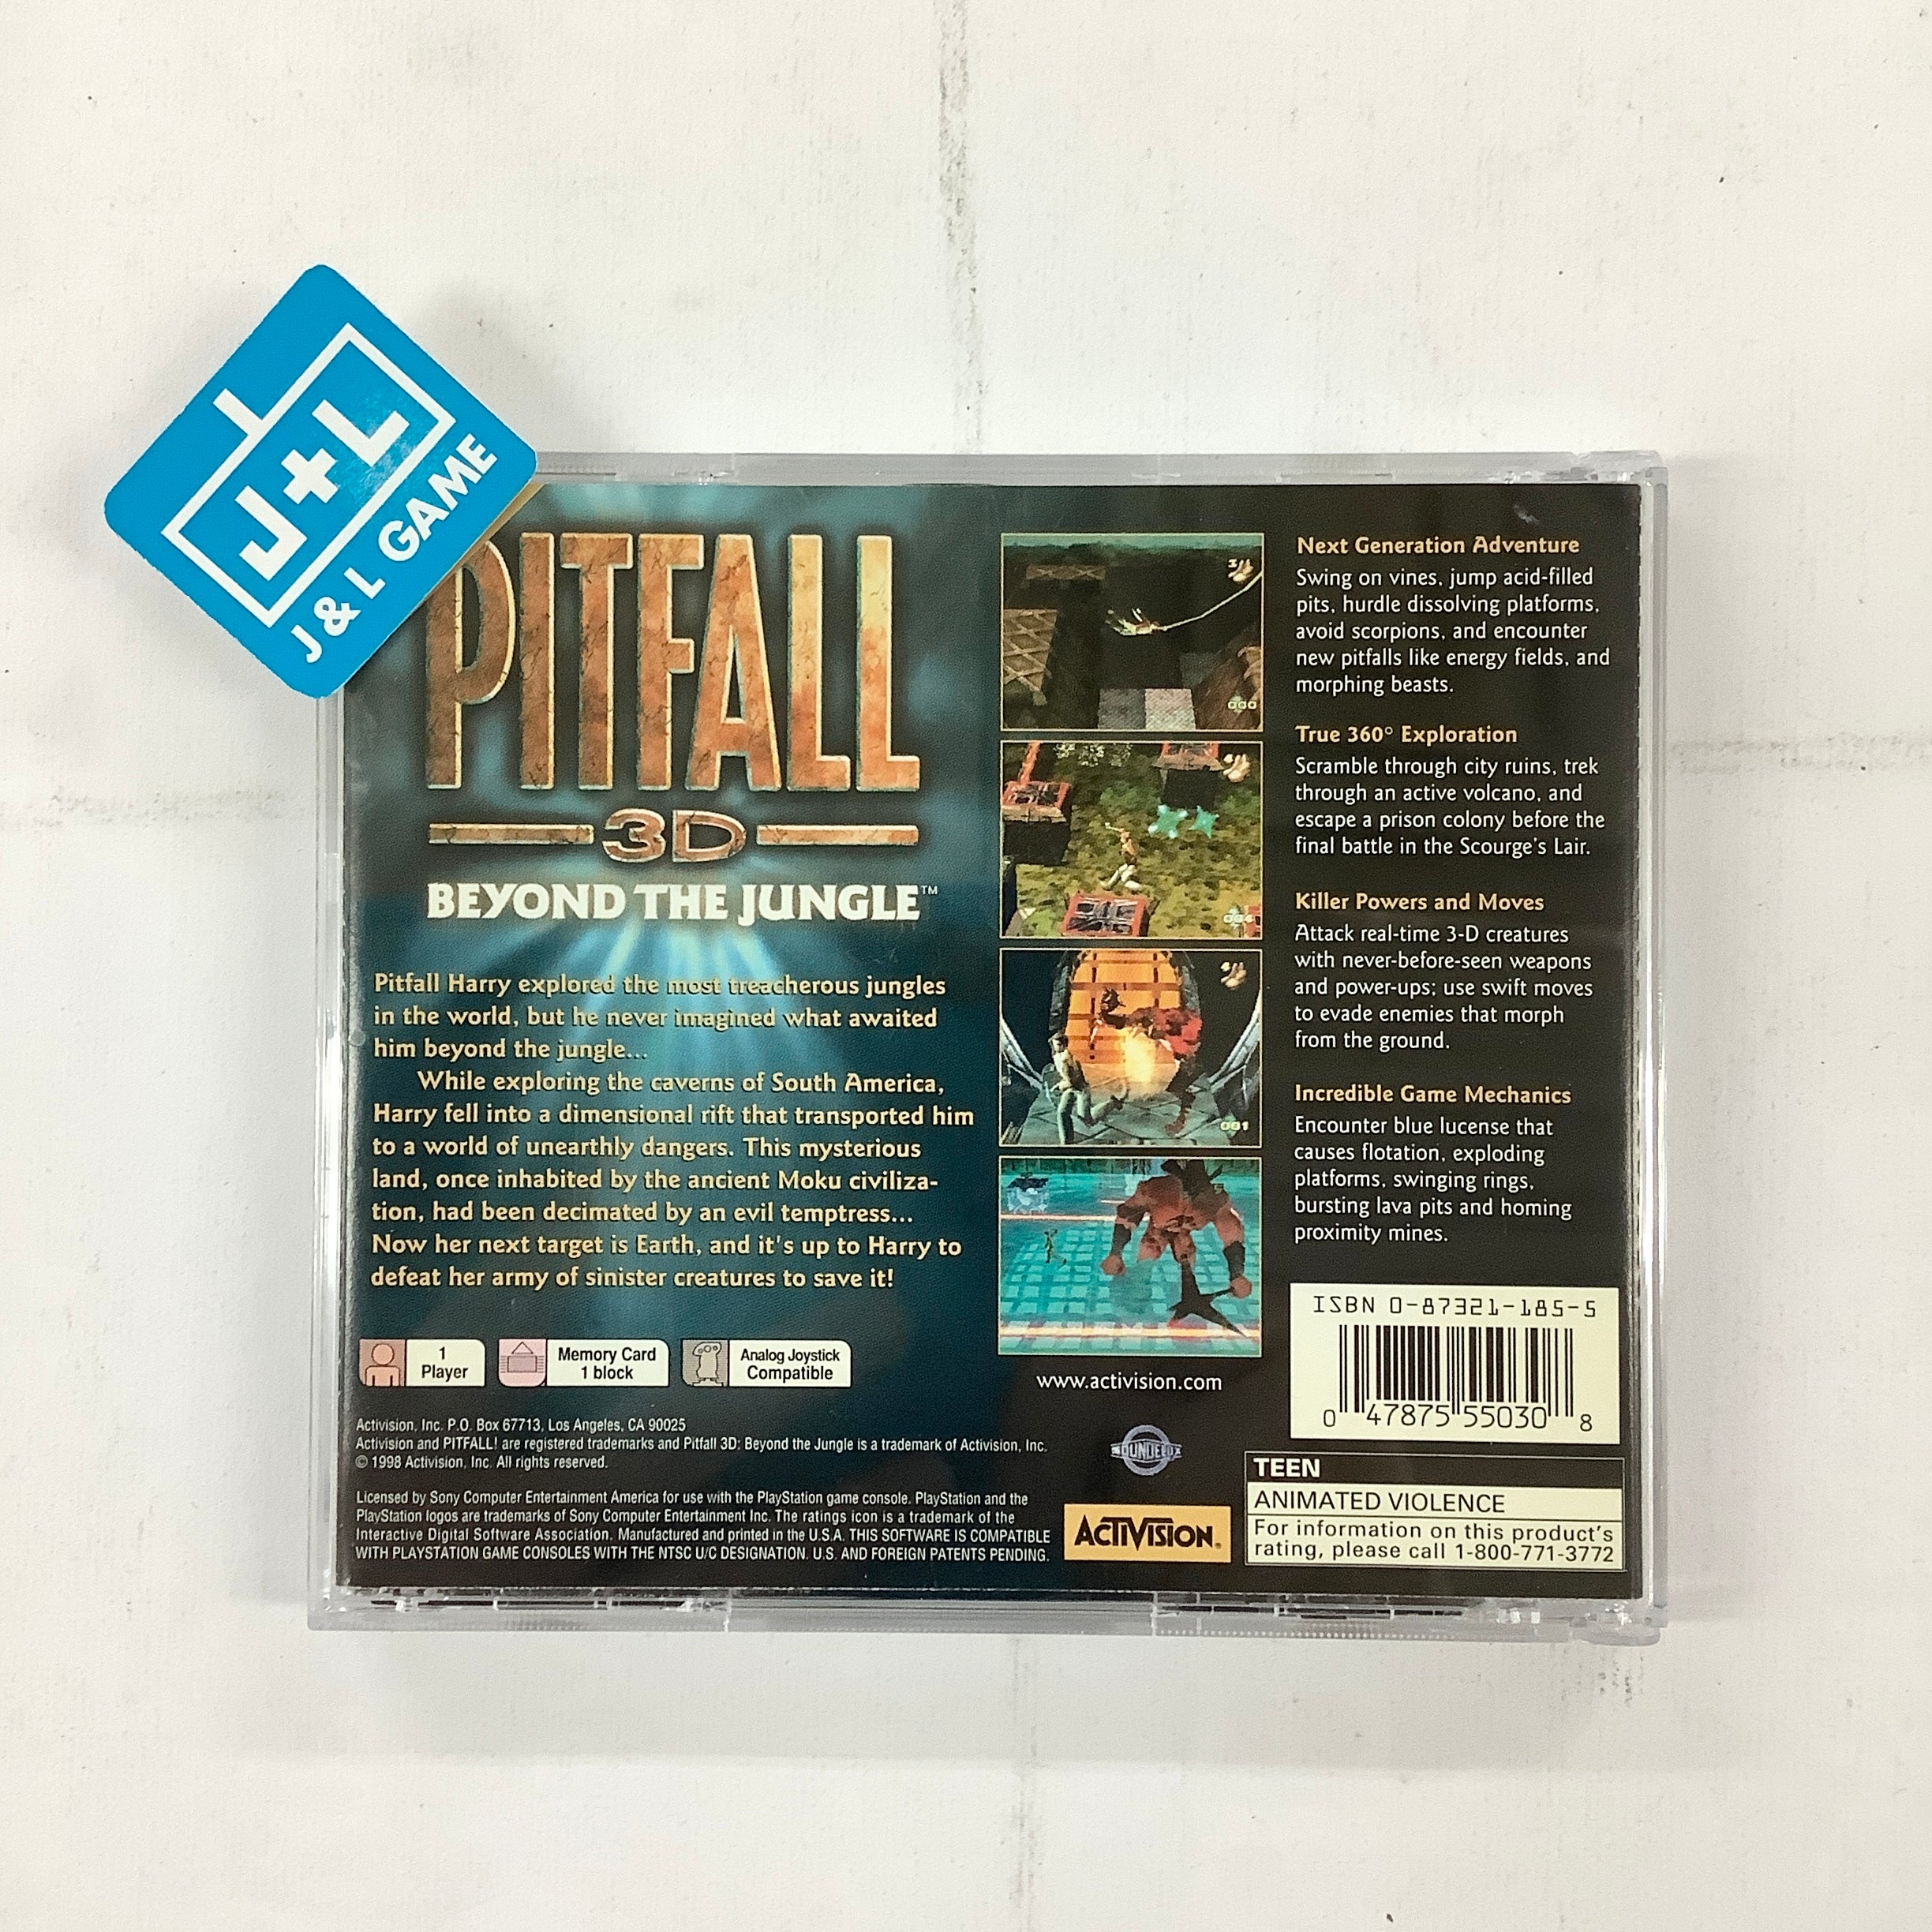 Pitfall 3D: Beyond the Jungle - (PS1) PlayStation 1 [Pre-Owned] Video Games Activision   